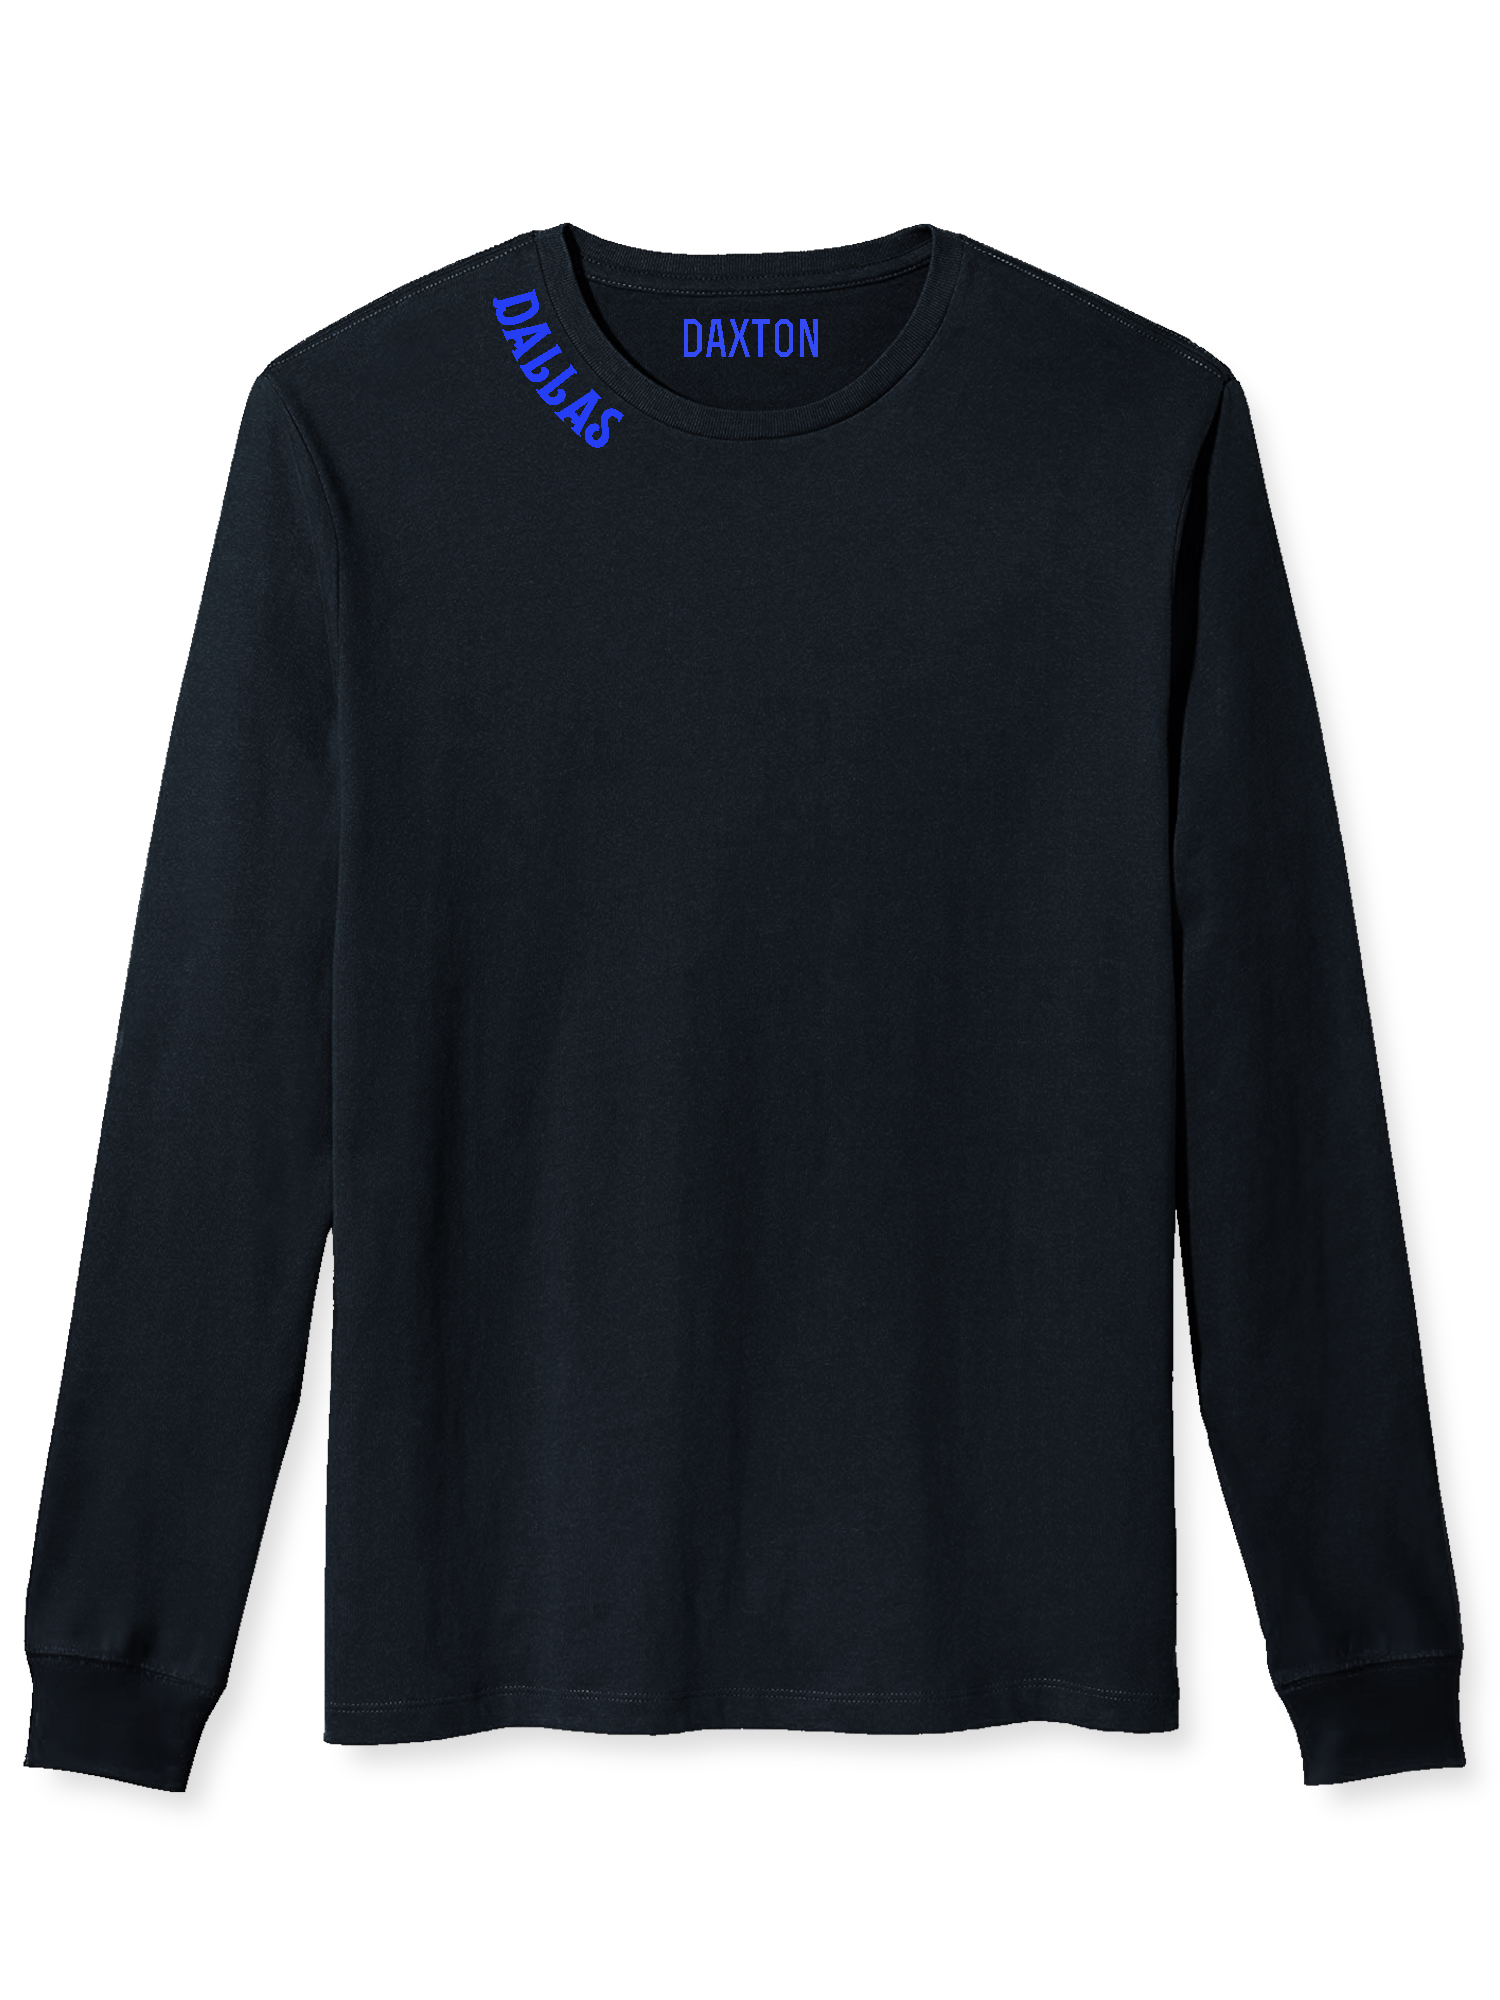 Daxton Premium Dallas Men Long Sleeves T Shirt Ultra Soft Medium Weight Cotton, Black Tee Royal Letters Large - image 2 of 3